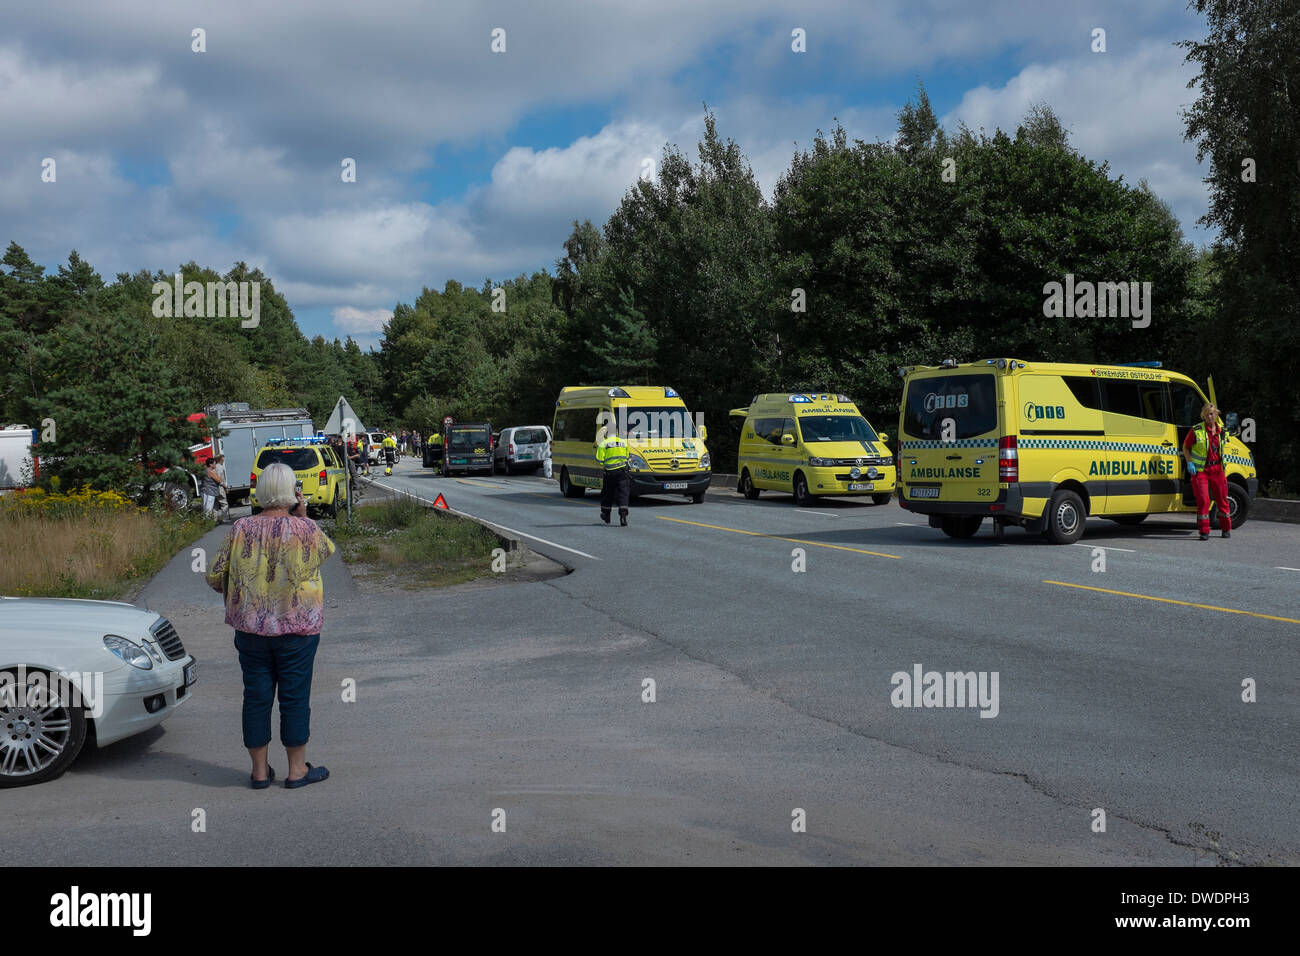 Minutes after the ambulance crew have arrived at a road accident scene in Norway. Stock Photo